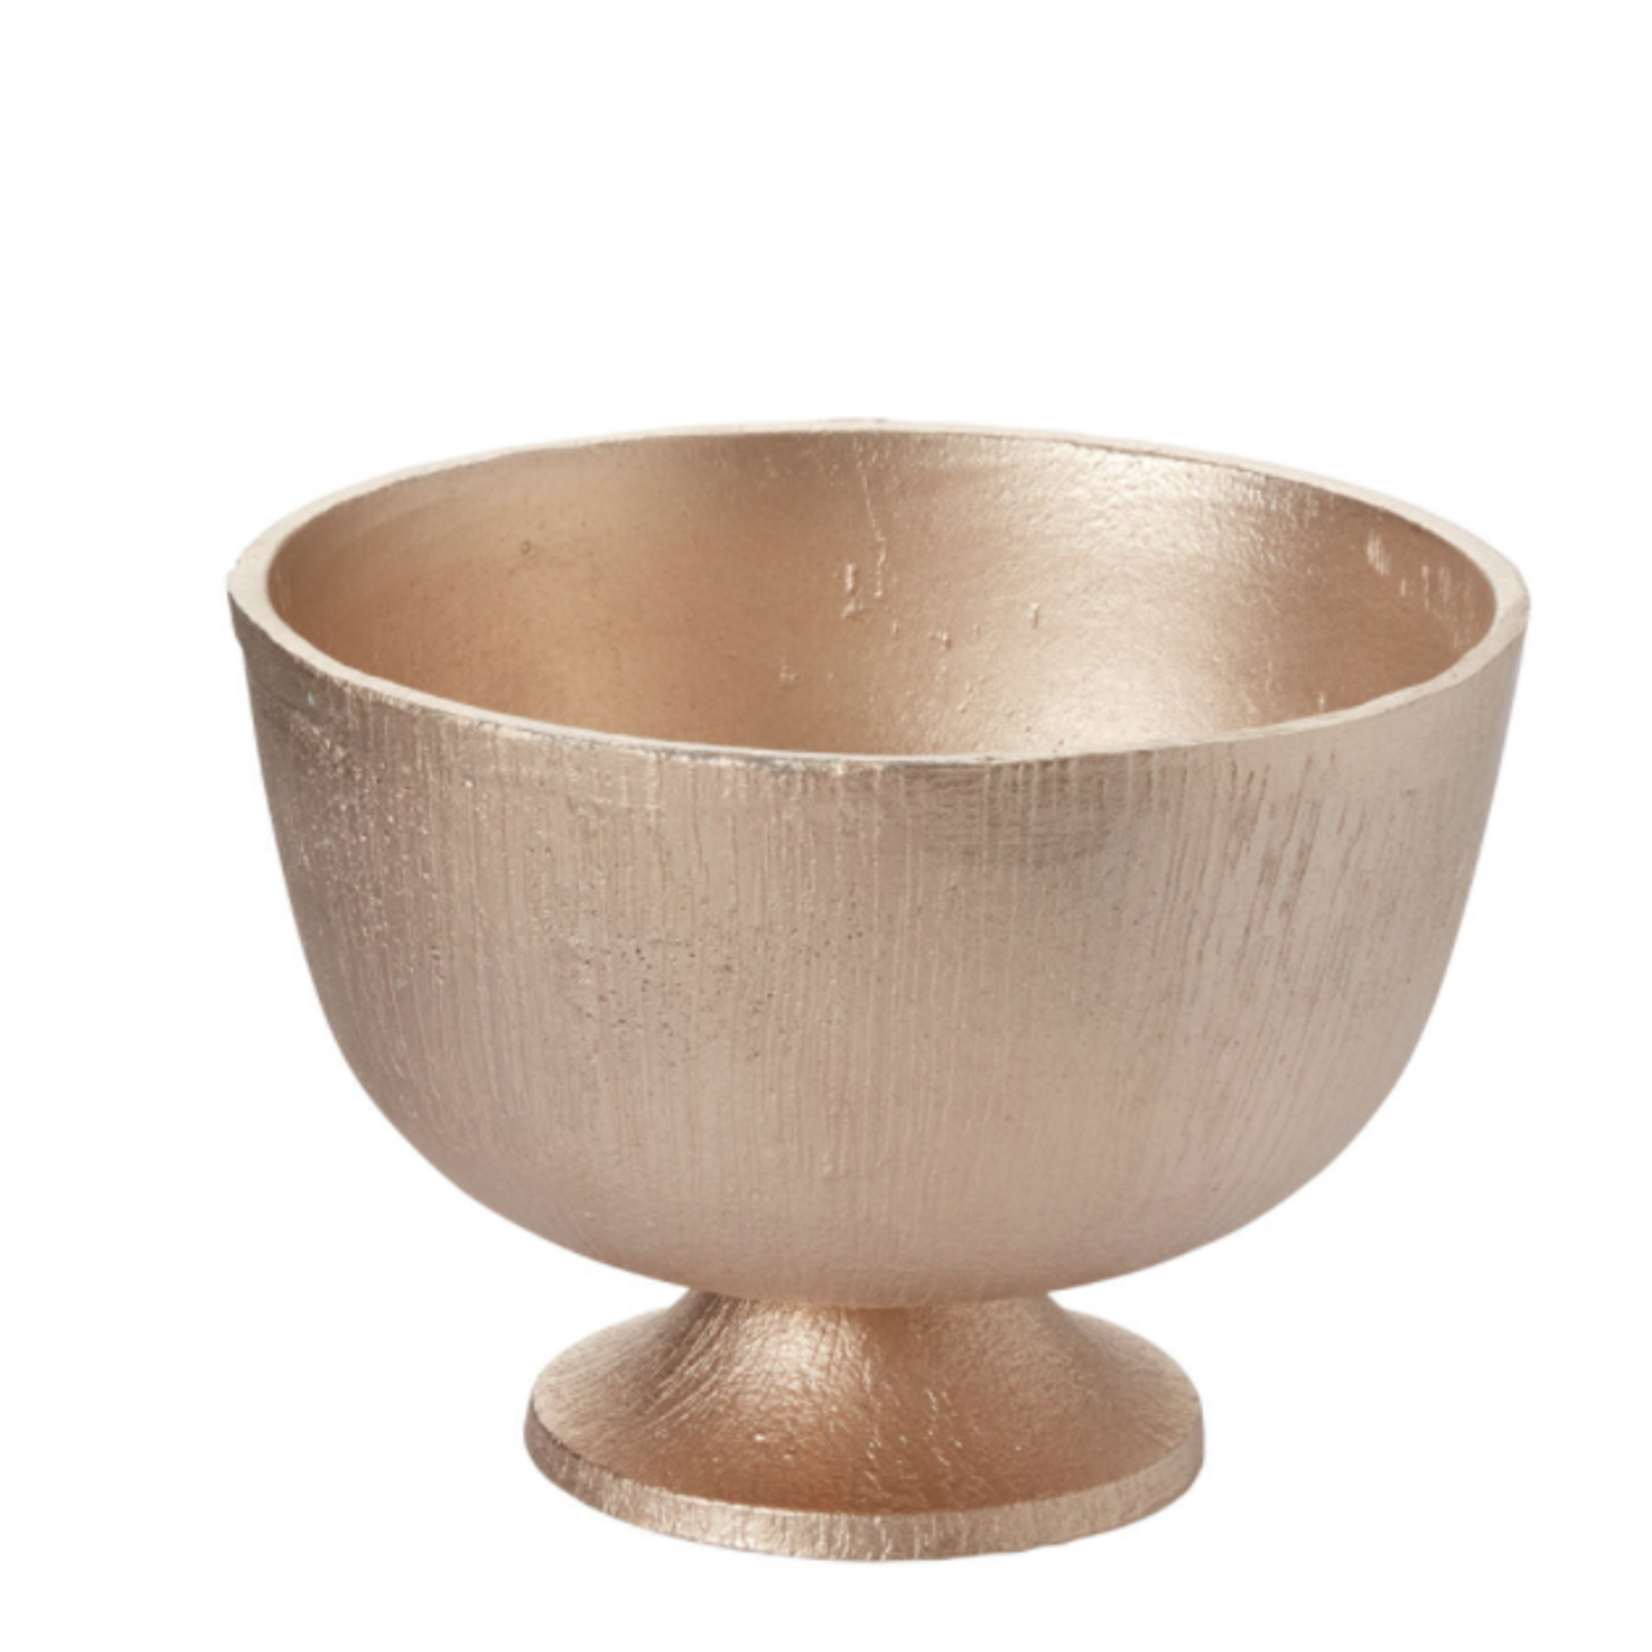 5.75"H X 8" CHAMPAGNE METAL CALEDONIA COMPOTE